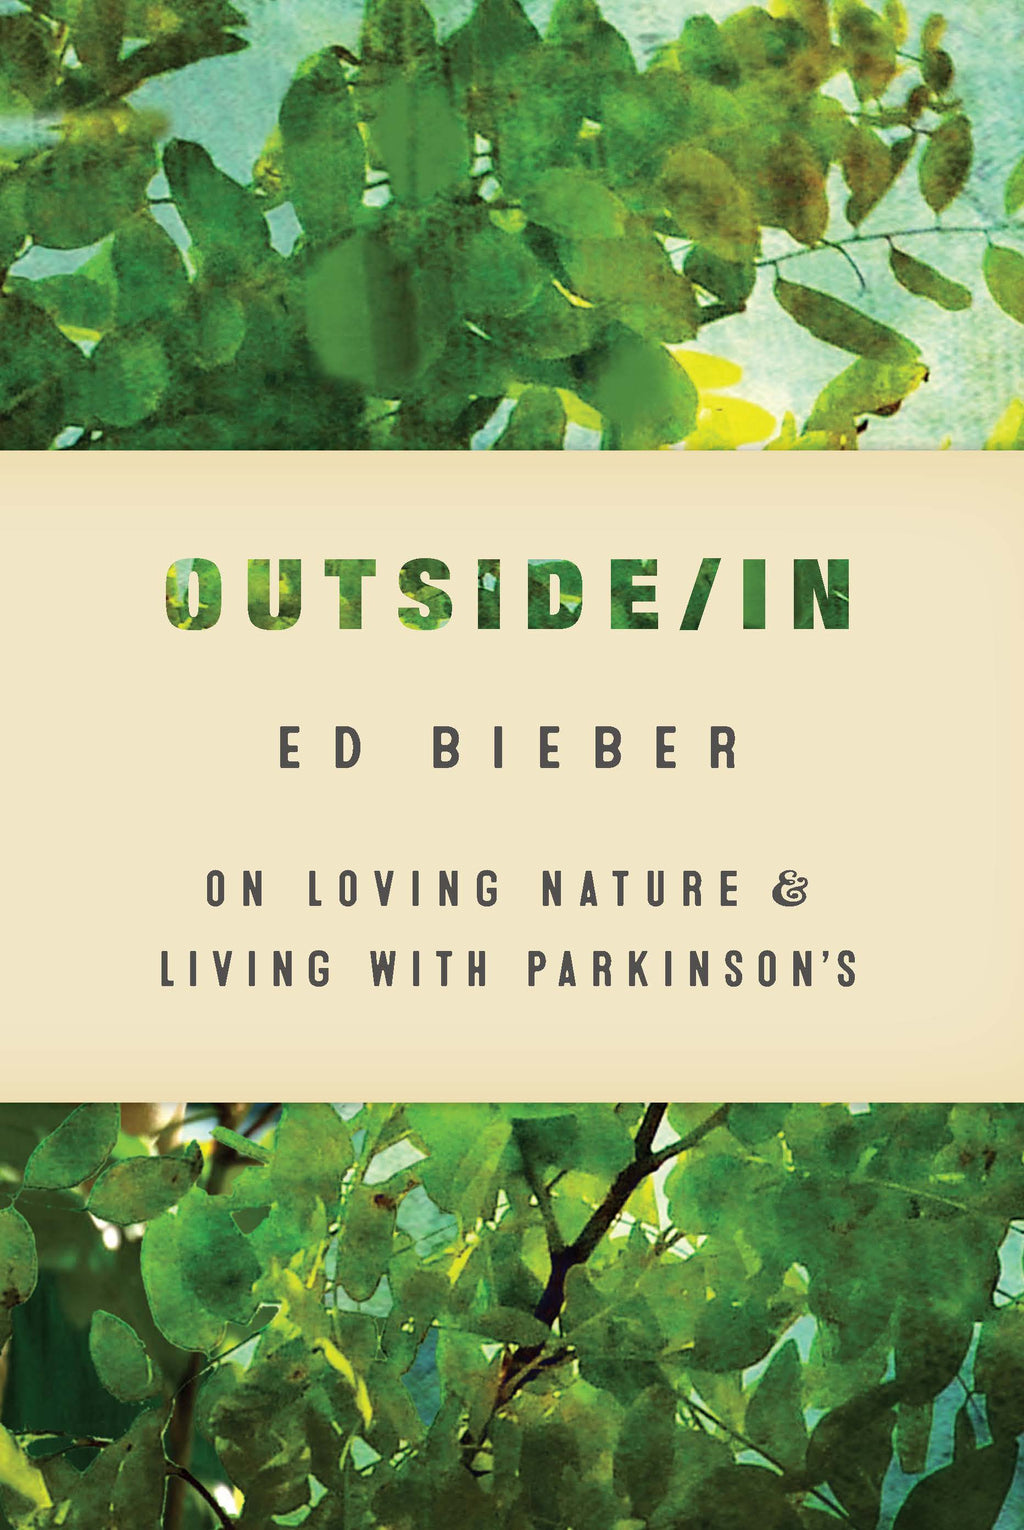 Outside/In: On Loving Nature & Living with Parkinson's